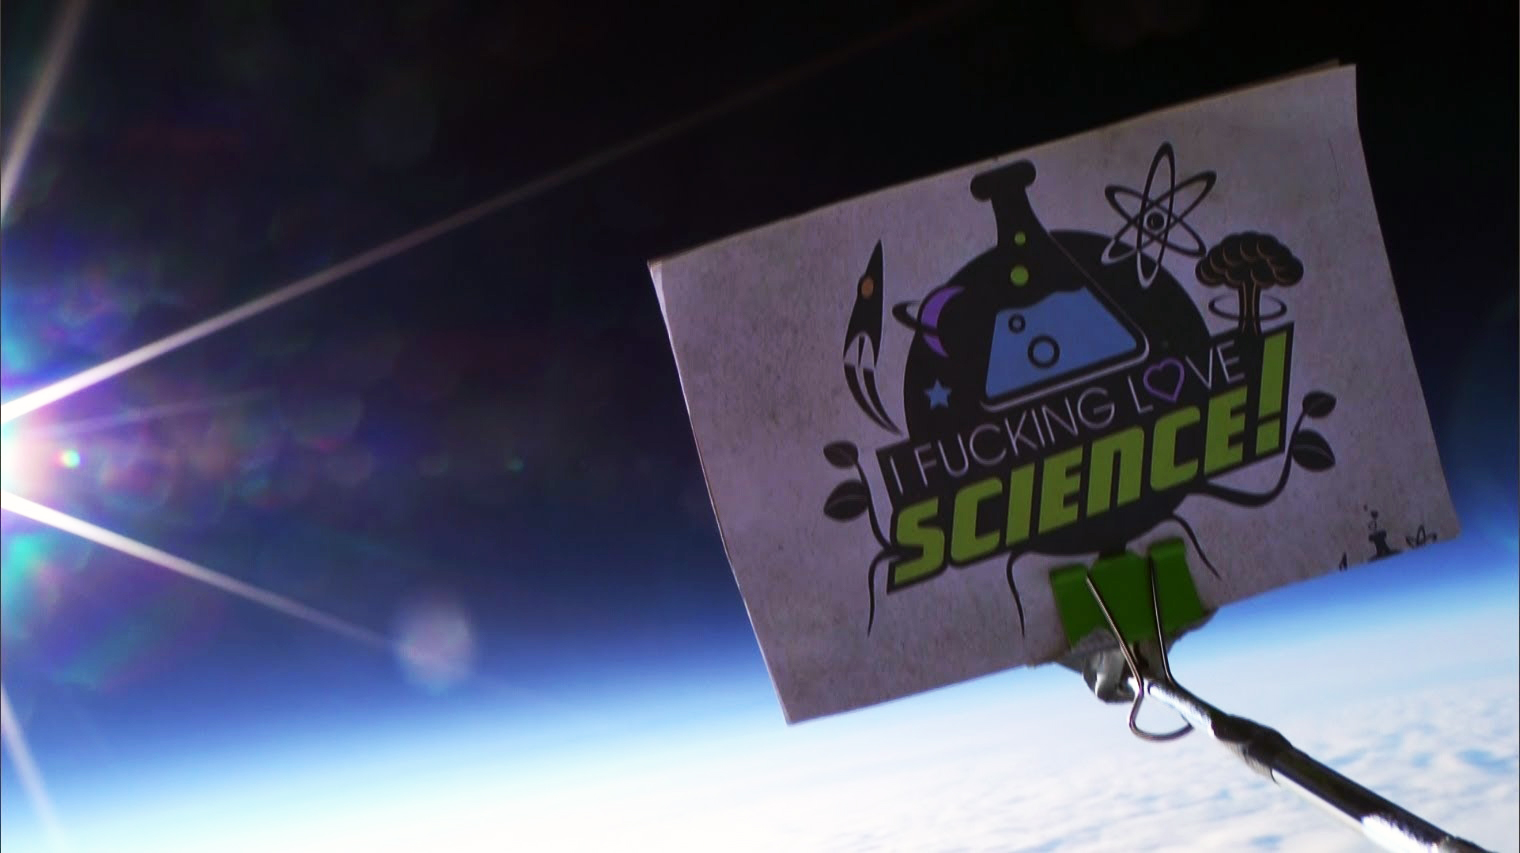 The "I f*cking love science" logo in space